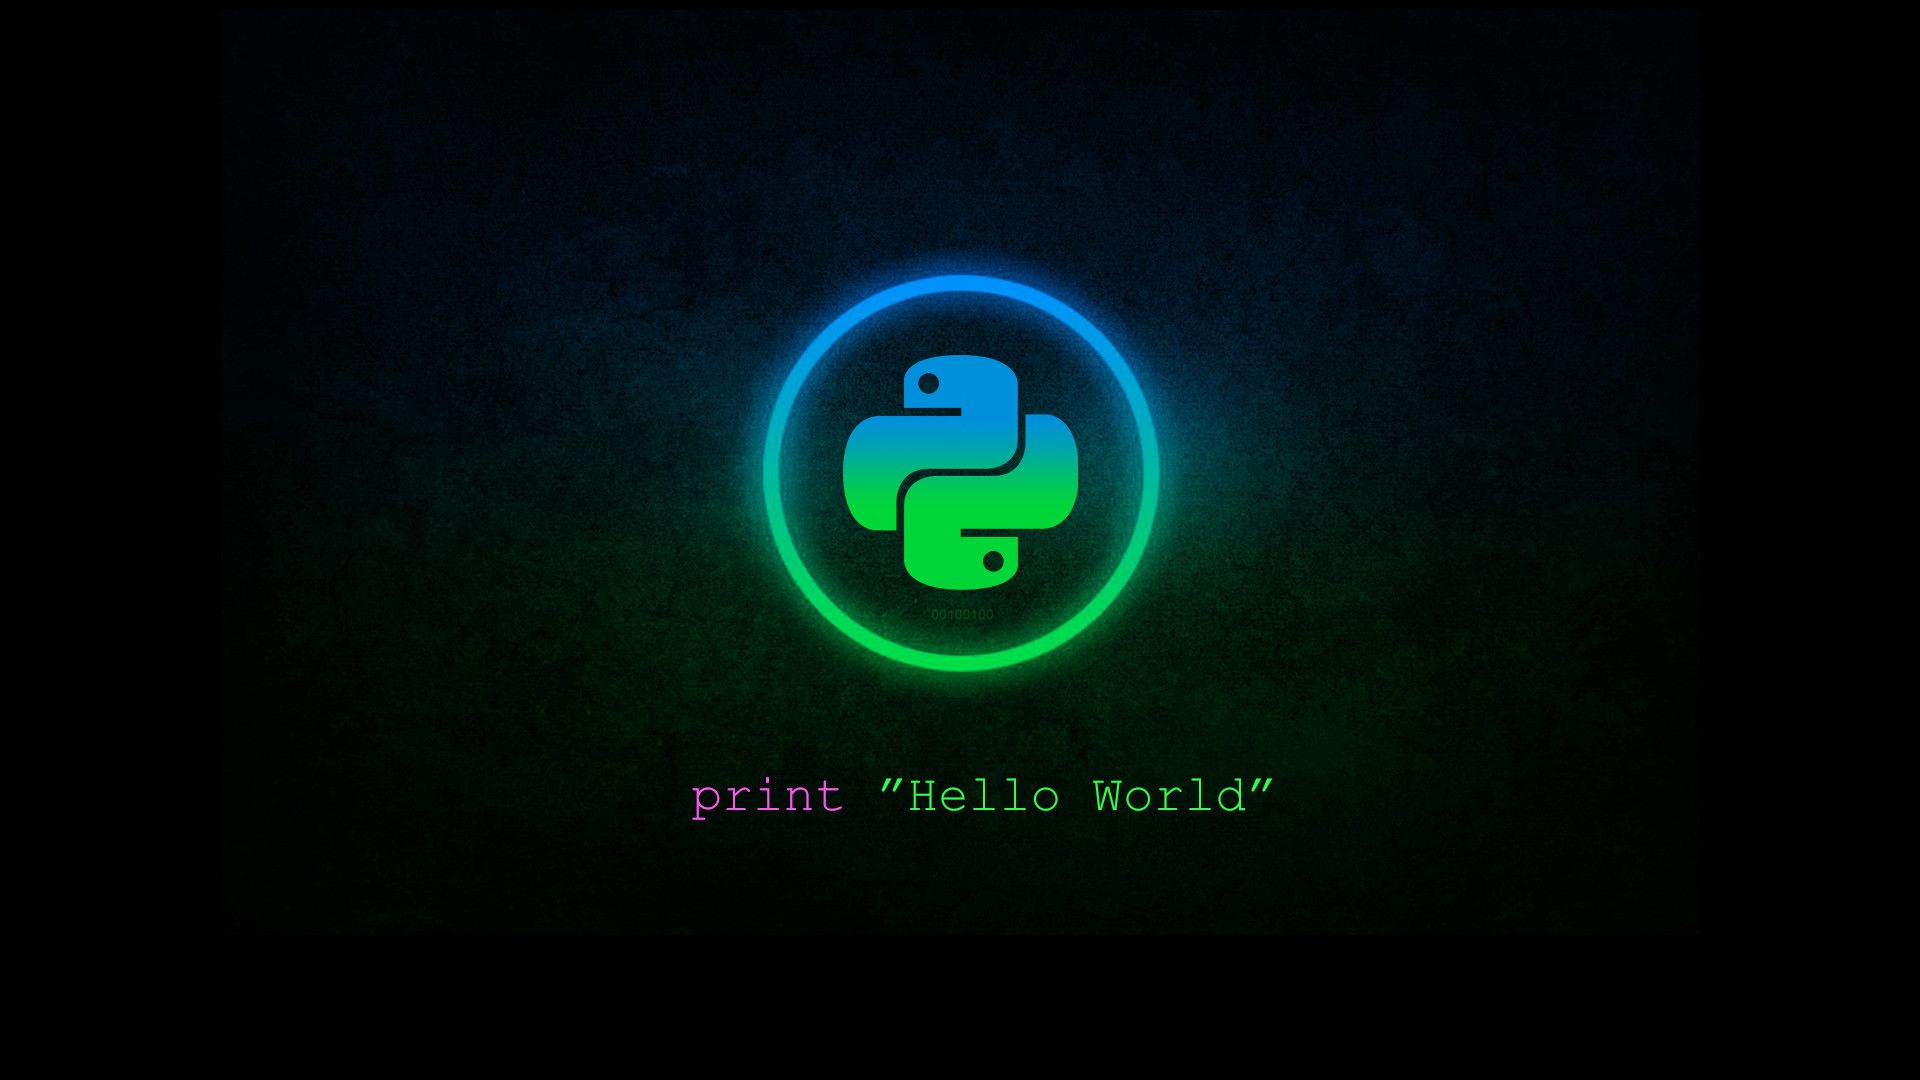 GitHub   Aatmaj ZephyrLearning Python This repo is made for the